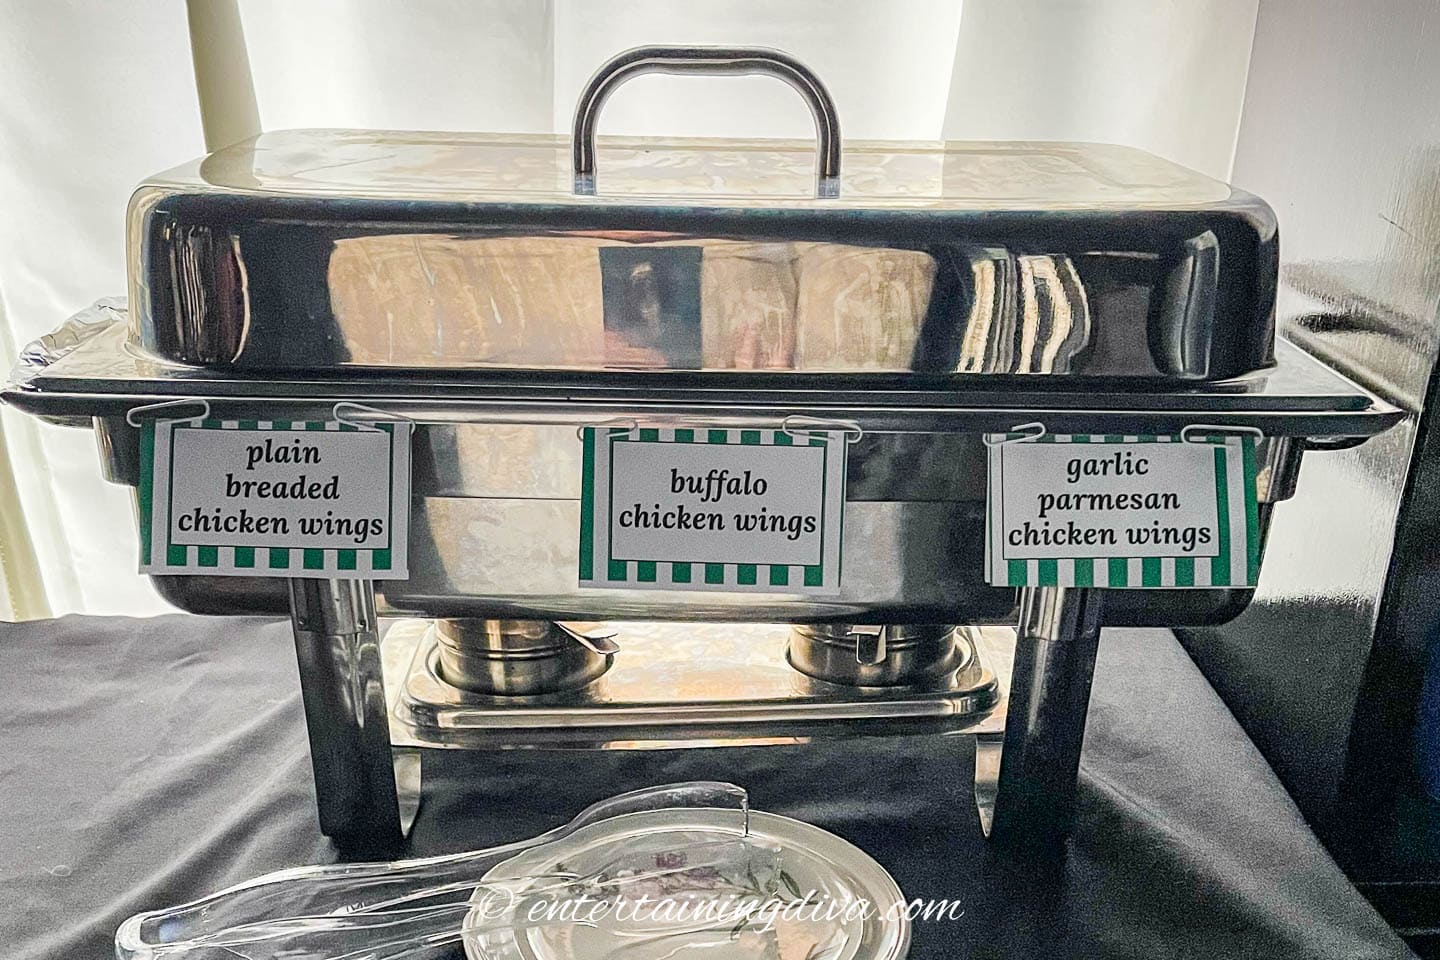 A large chafing dish with printable food labels clipped to the side of it